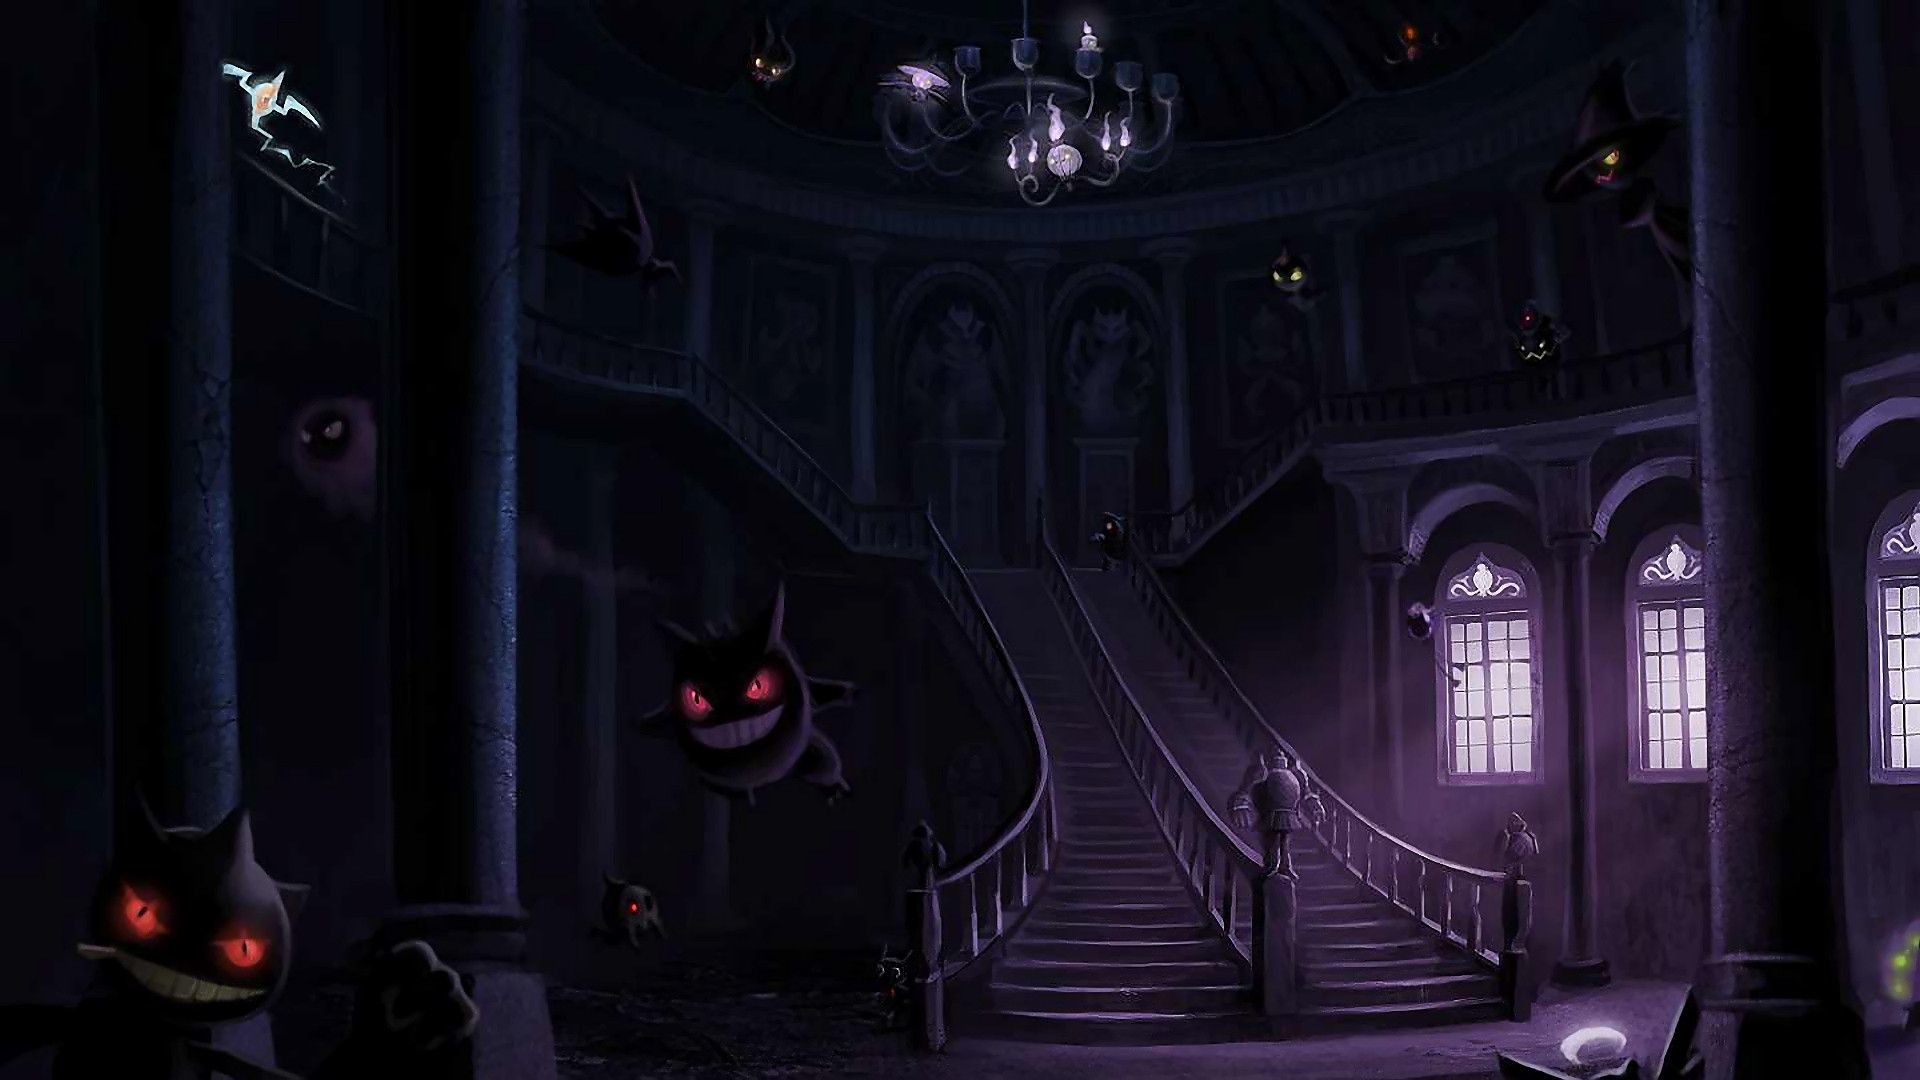 1920x1080 Lavender town pokemon ghastly gengar and other ghost type wallpaper